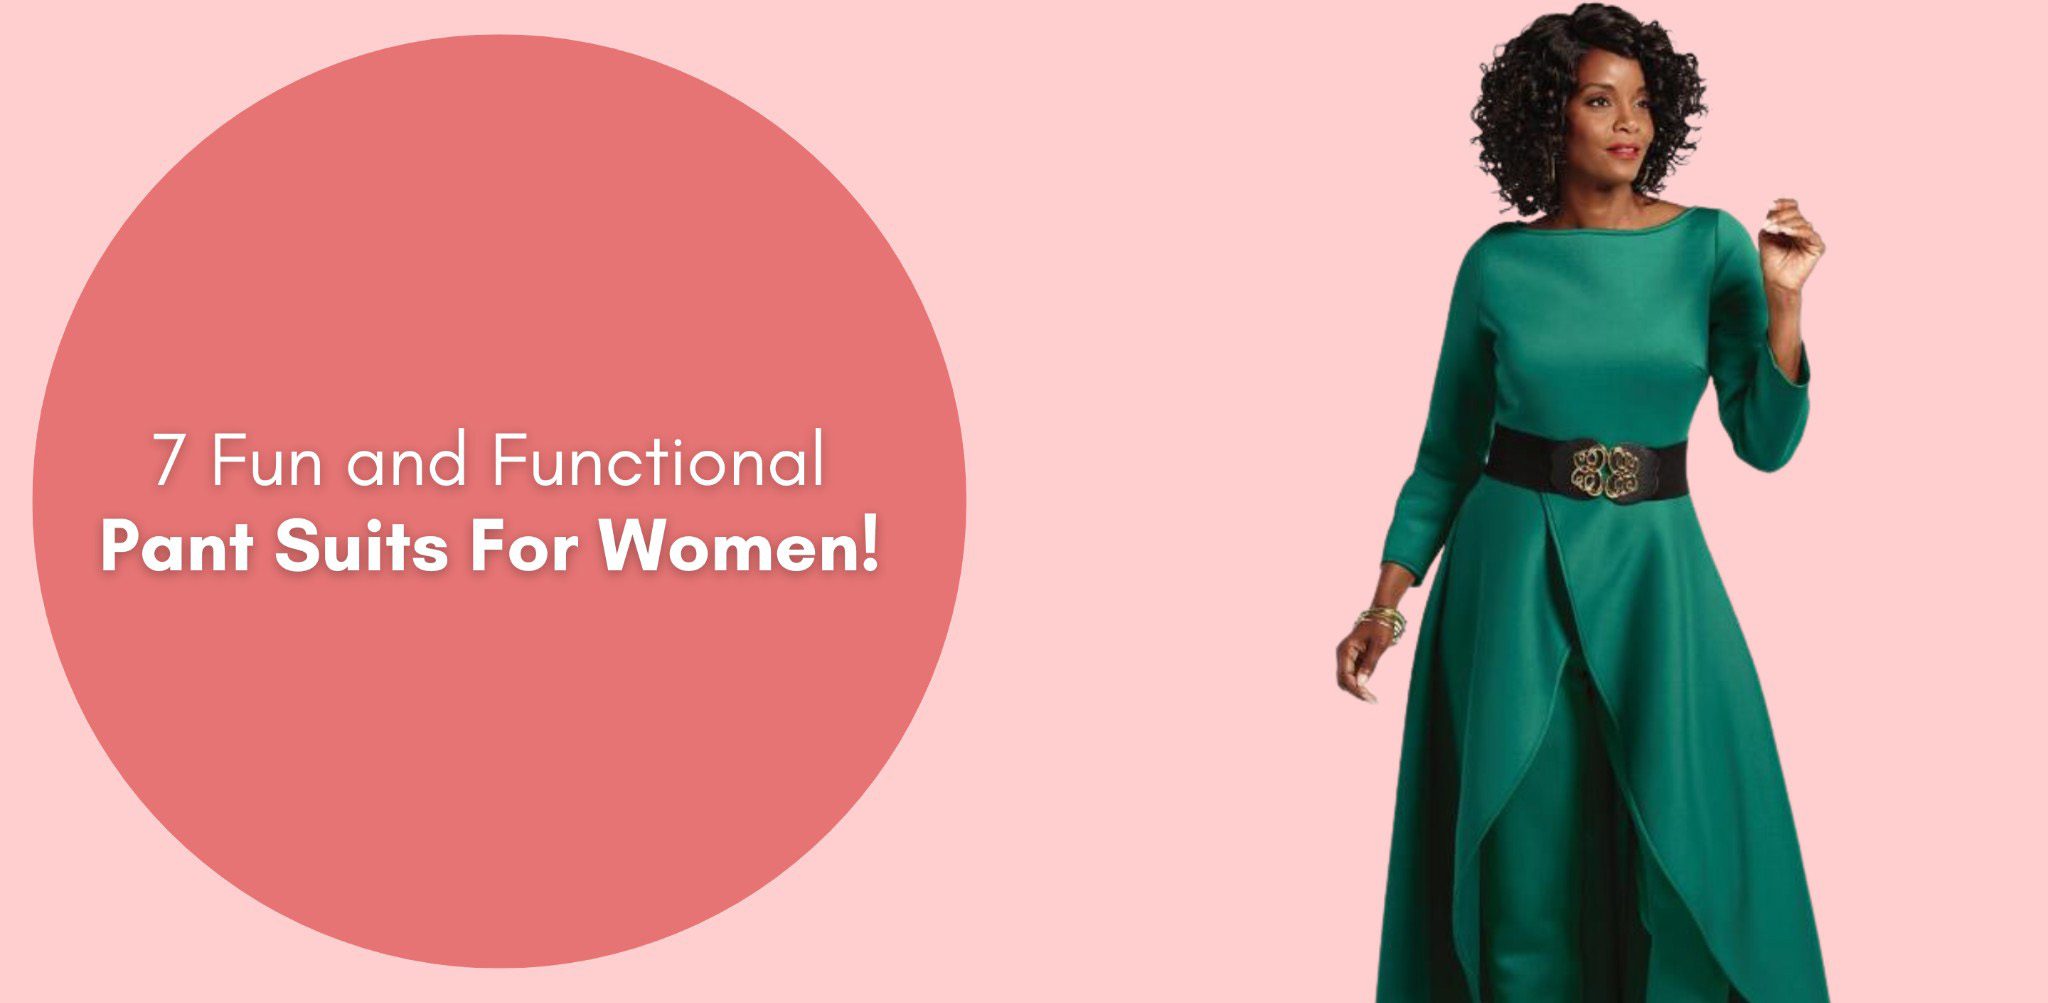 7 Fun and Functional Pant Suits For Women!